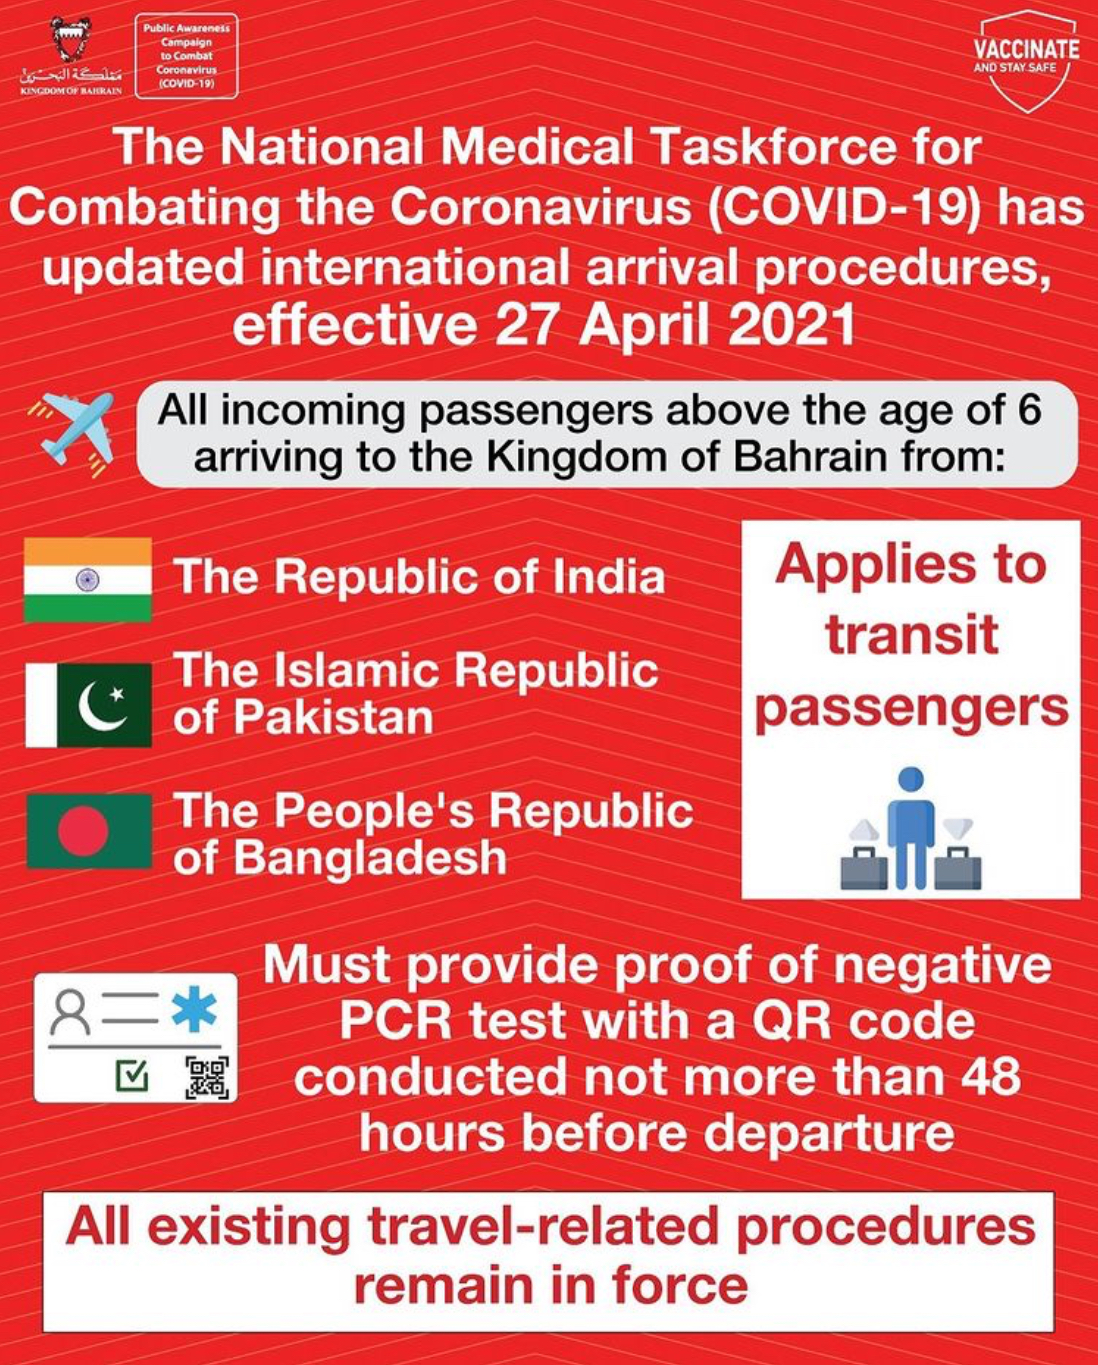 The National Medical Taskforce for Combating the Coronavirus (COVID-19) issues updated arrival procedures for passengers from India, Pakistan, and Bangladesh effective 27 April 2021